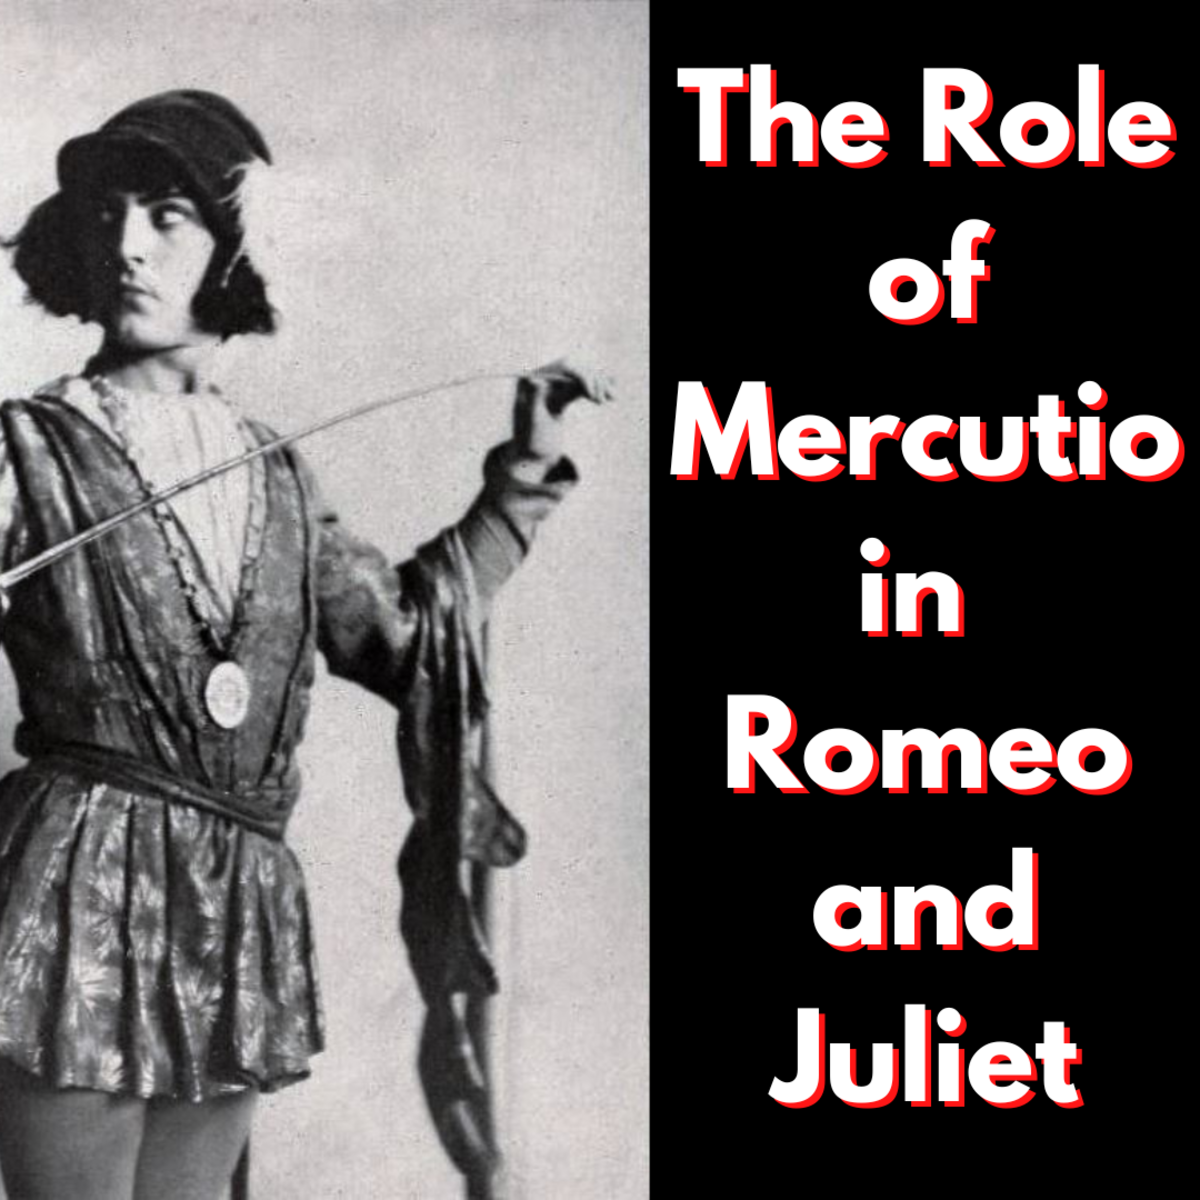 Read on to learn about Mercutio's role in Shakespeare's Romeo and Juliet. This image shows the actor Dennis King as Mercutio in a 1923 production of the play.